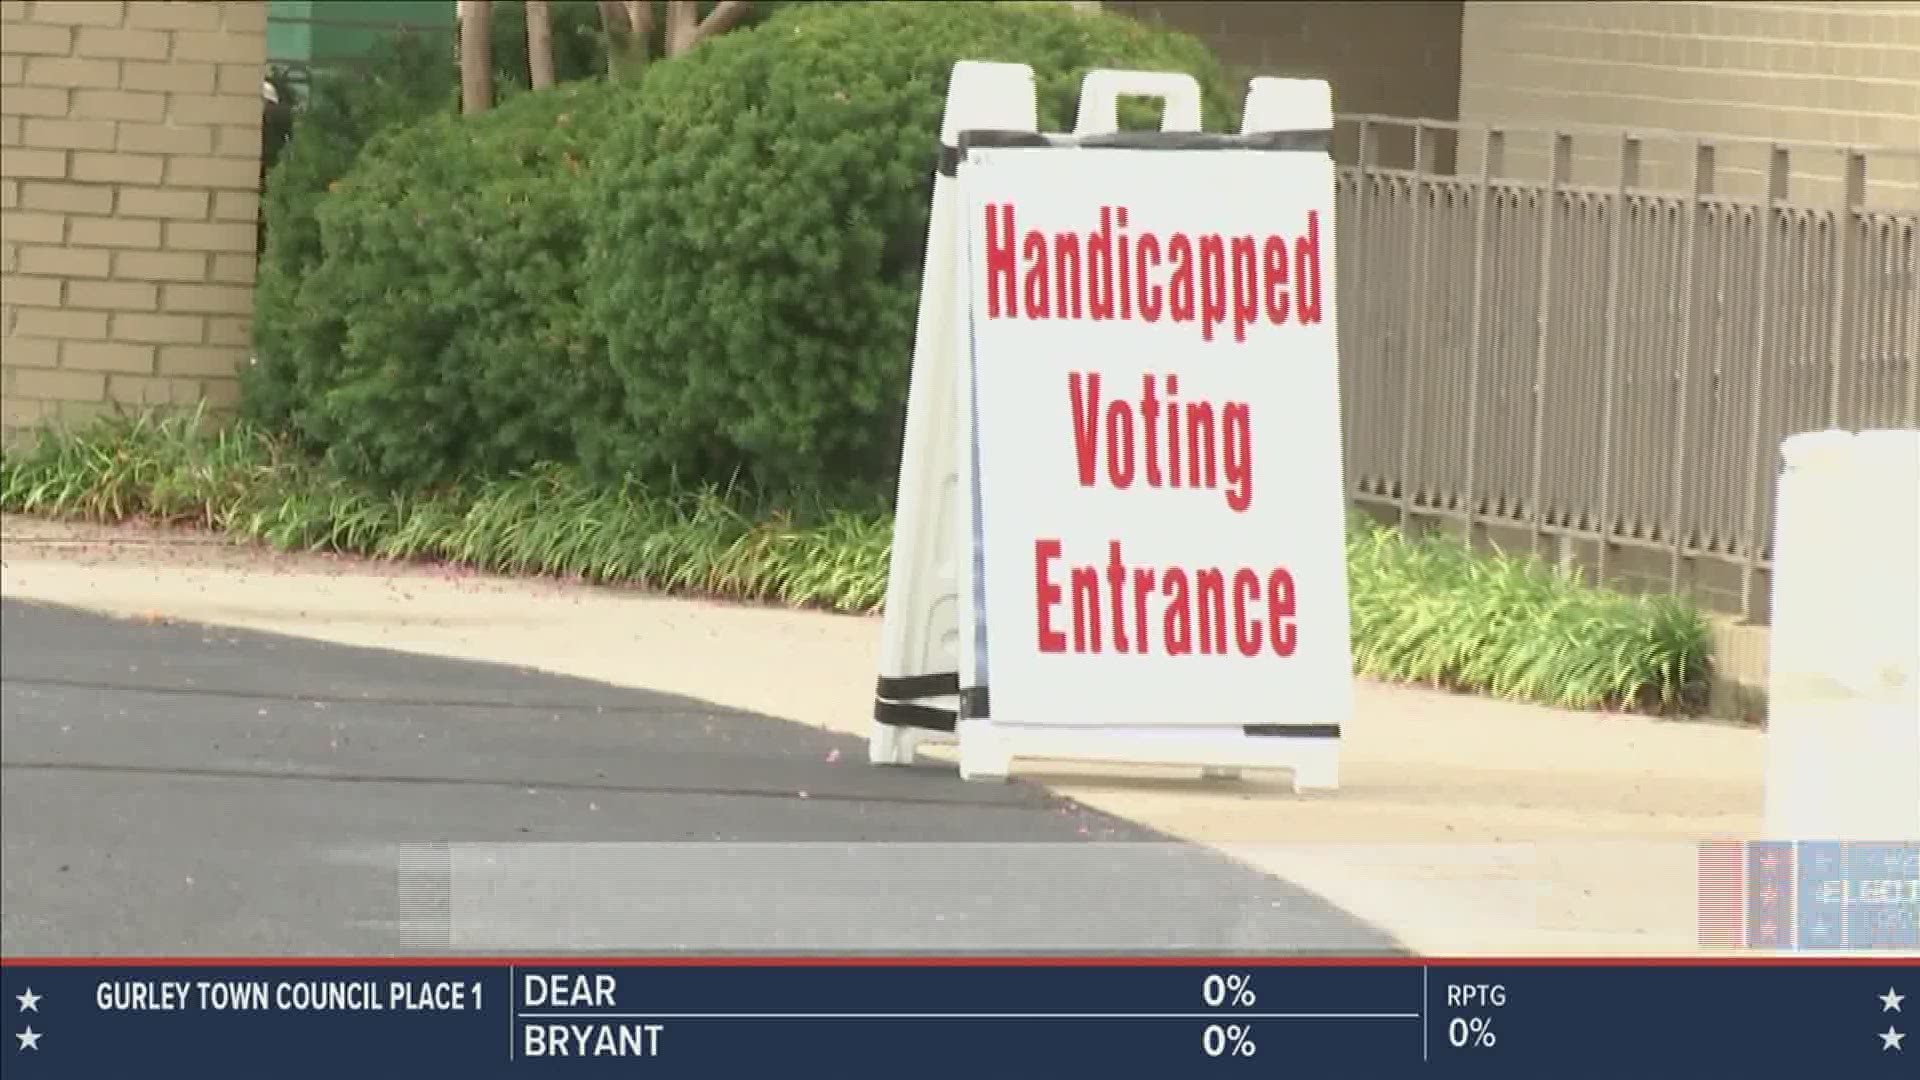 Here is what Huntsville polling places are doing to accommodate disabled voters.